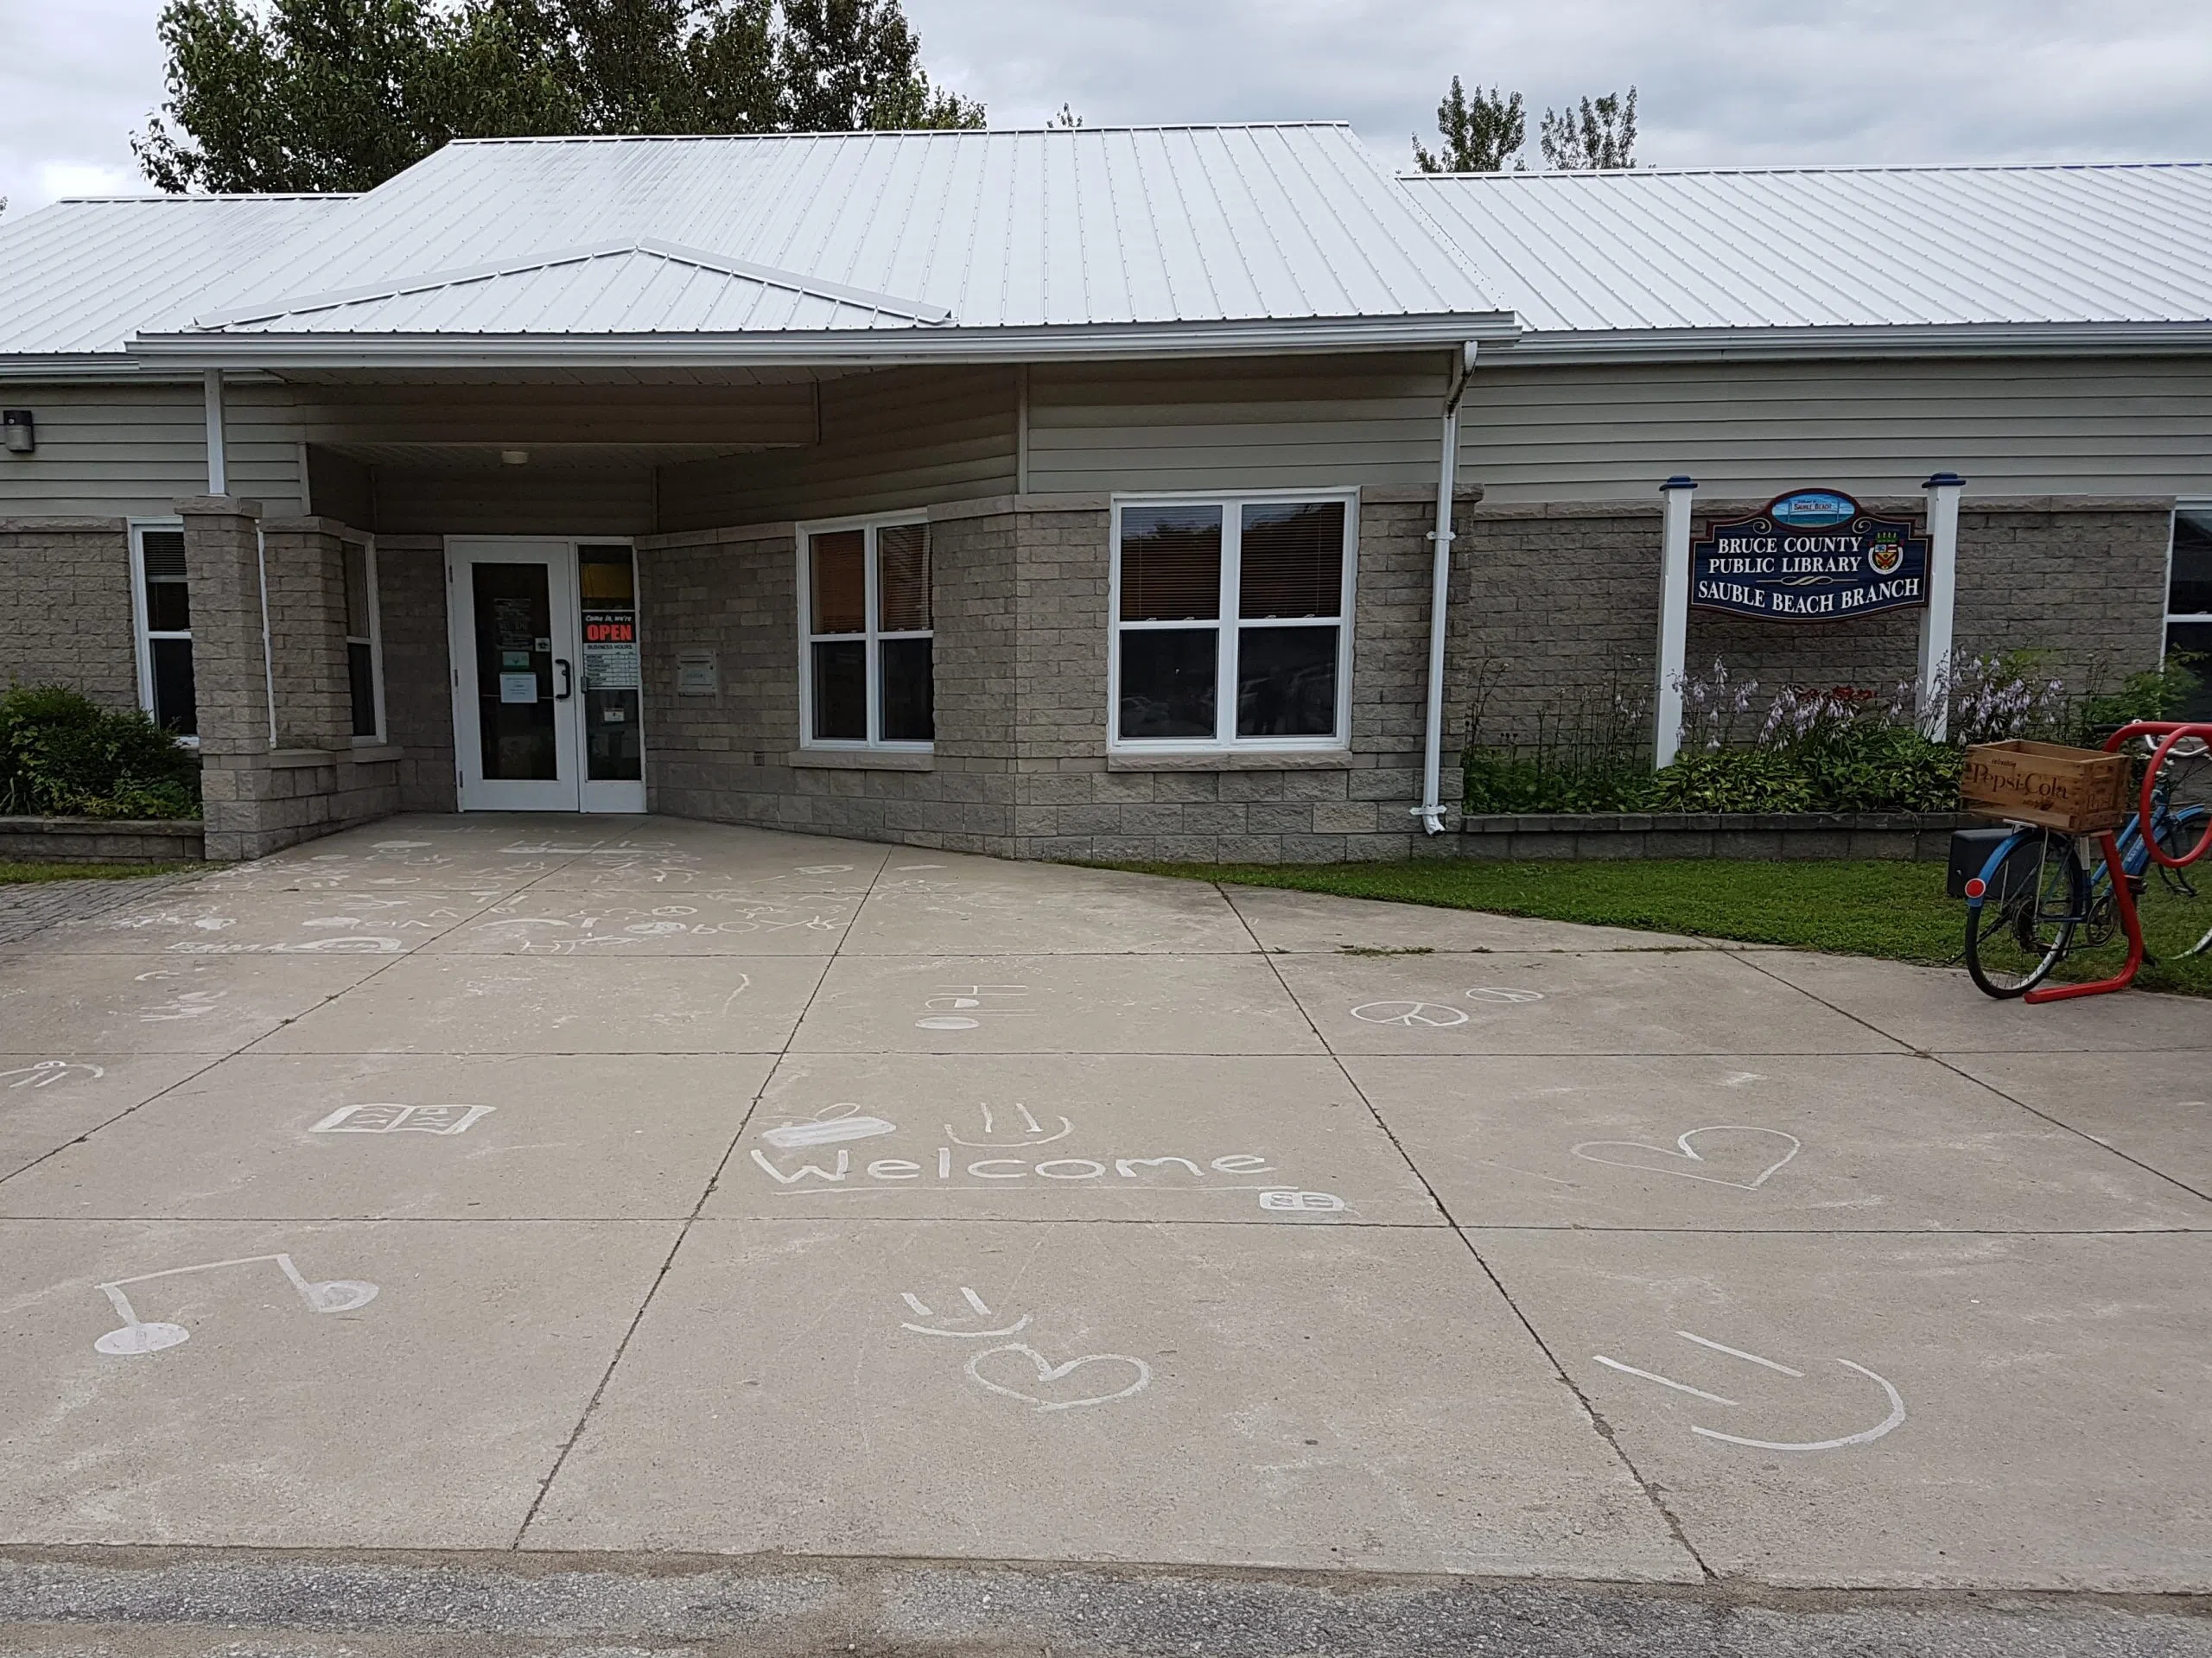 Sauble Beach library Closing For Renovations